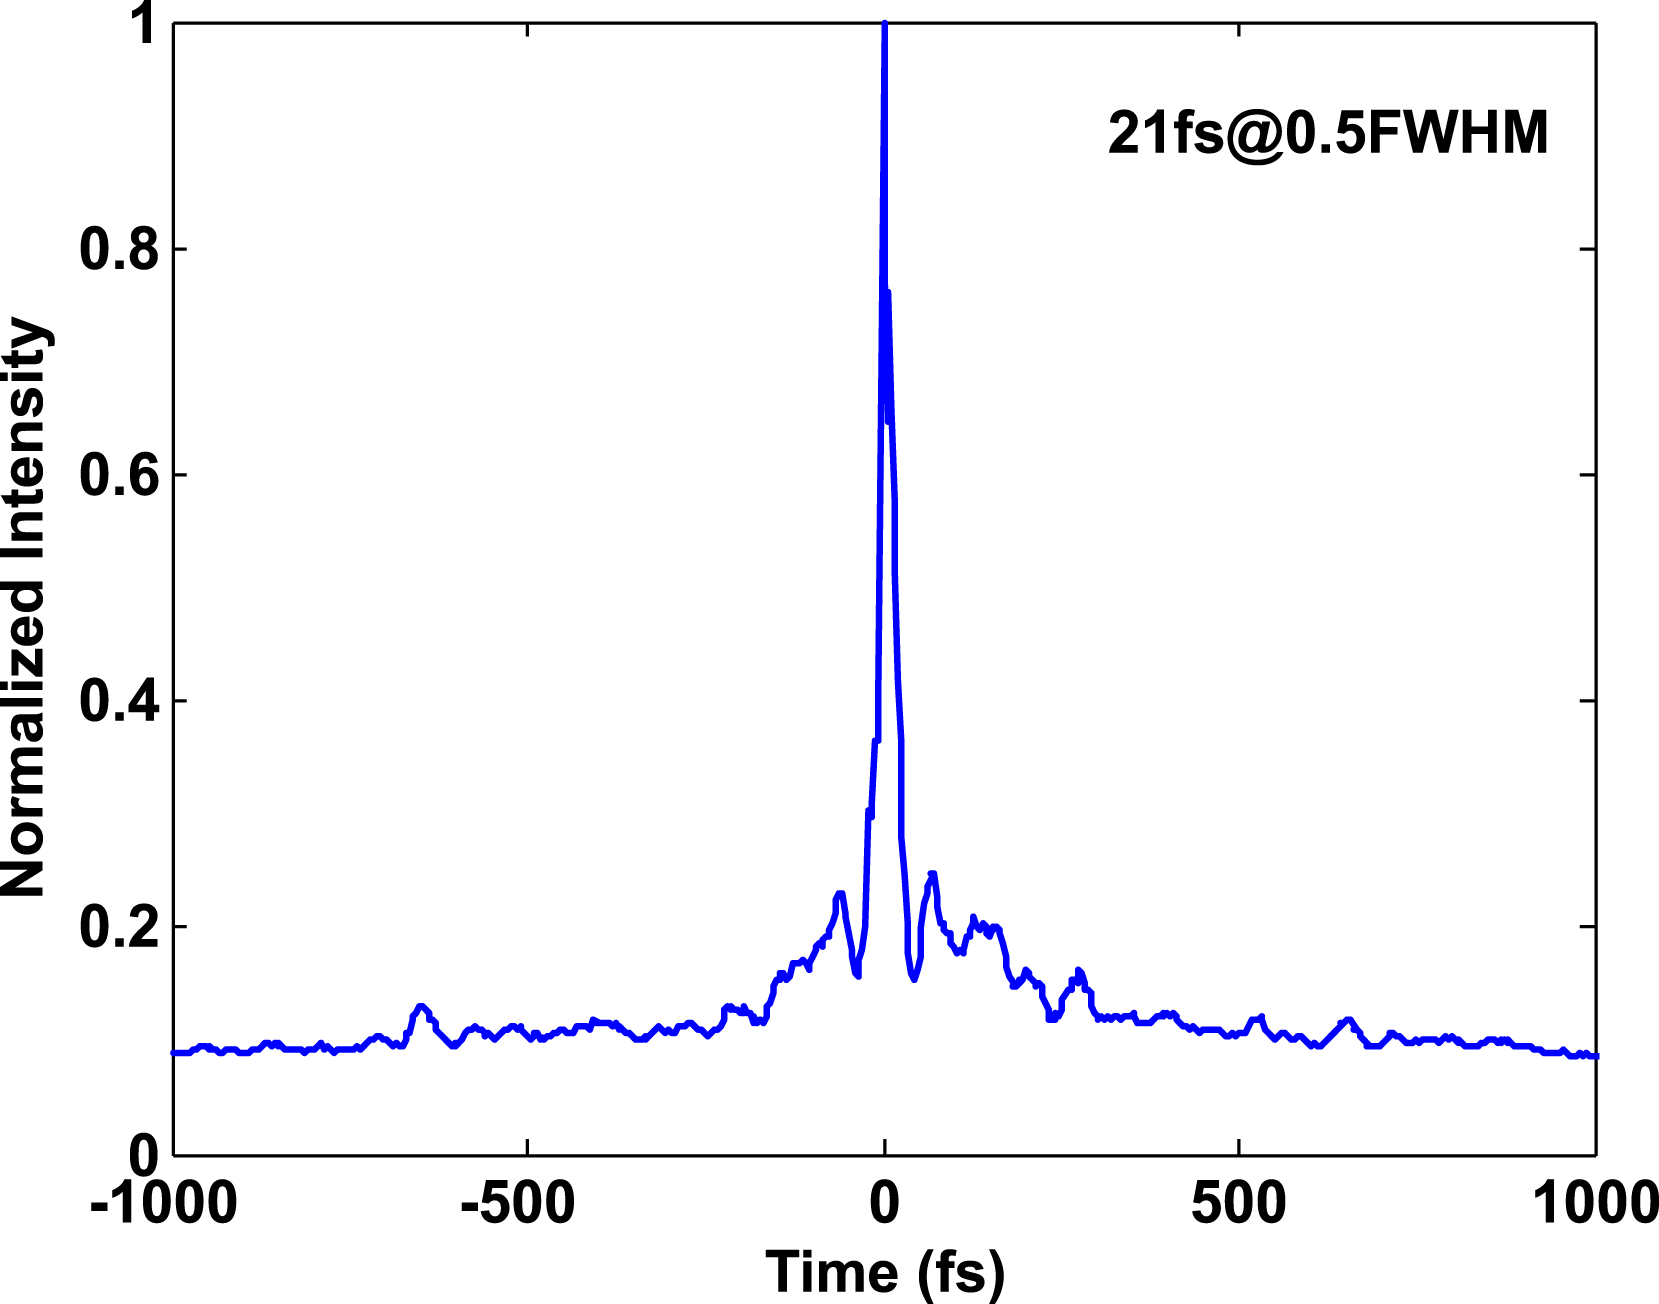 Analysis and construction status of SG-II 5PW laser facility